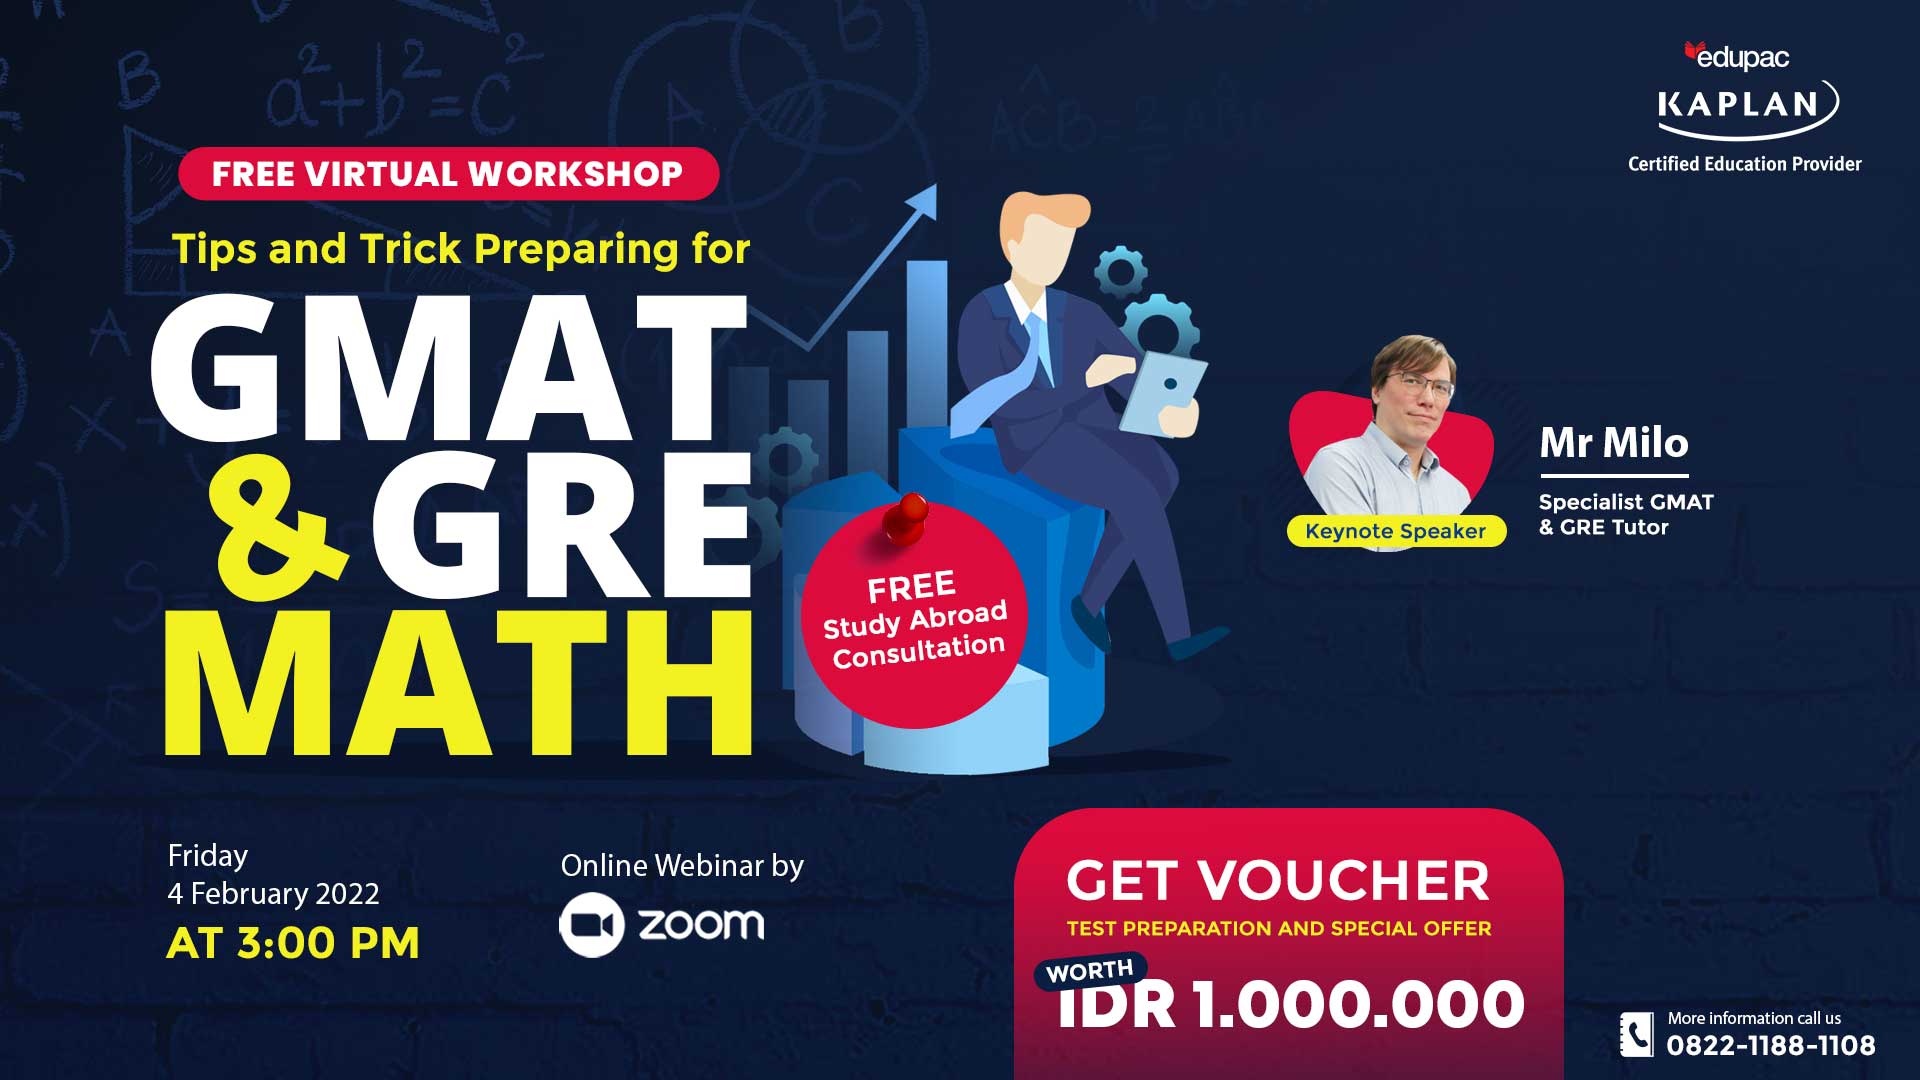 Free Virtual Workshop "Tips and Trick Preparing for GMAT & GRE Math" 